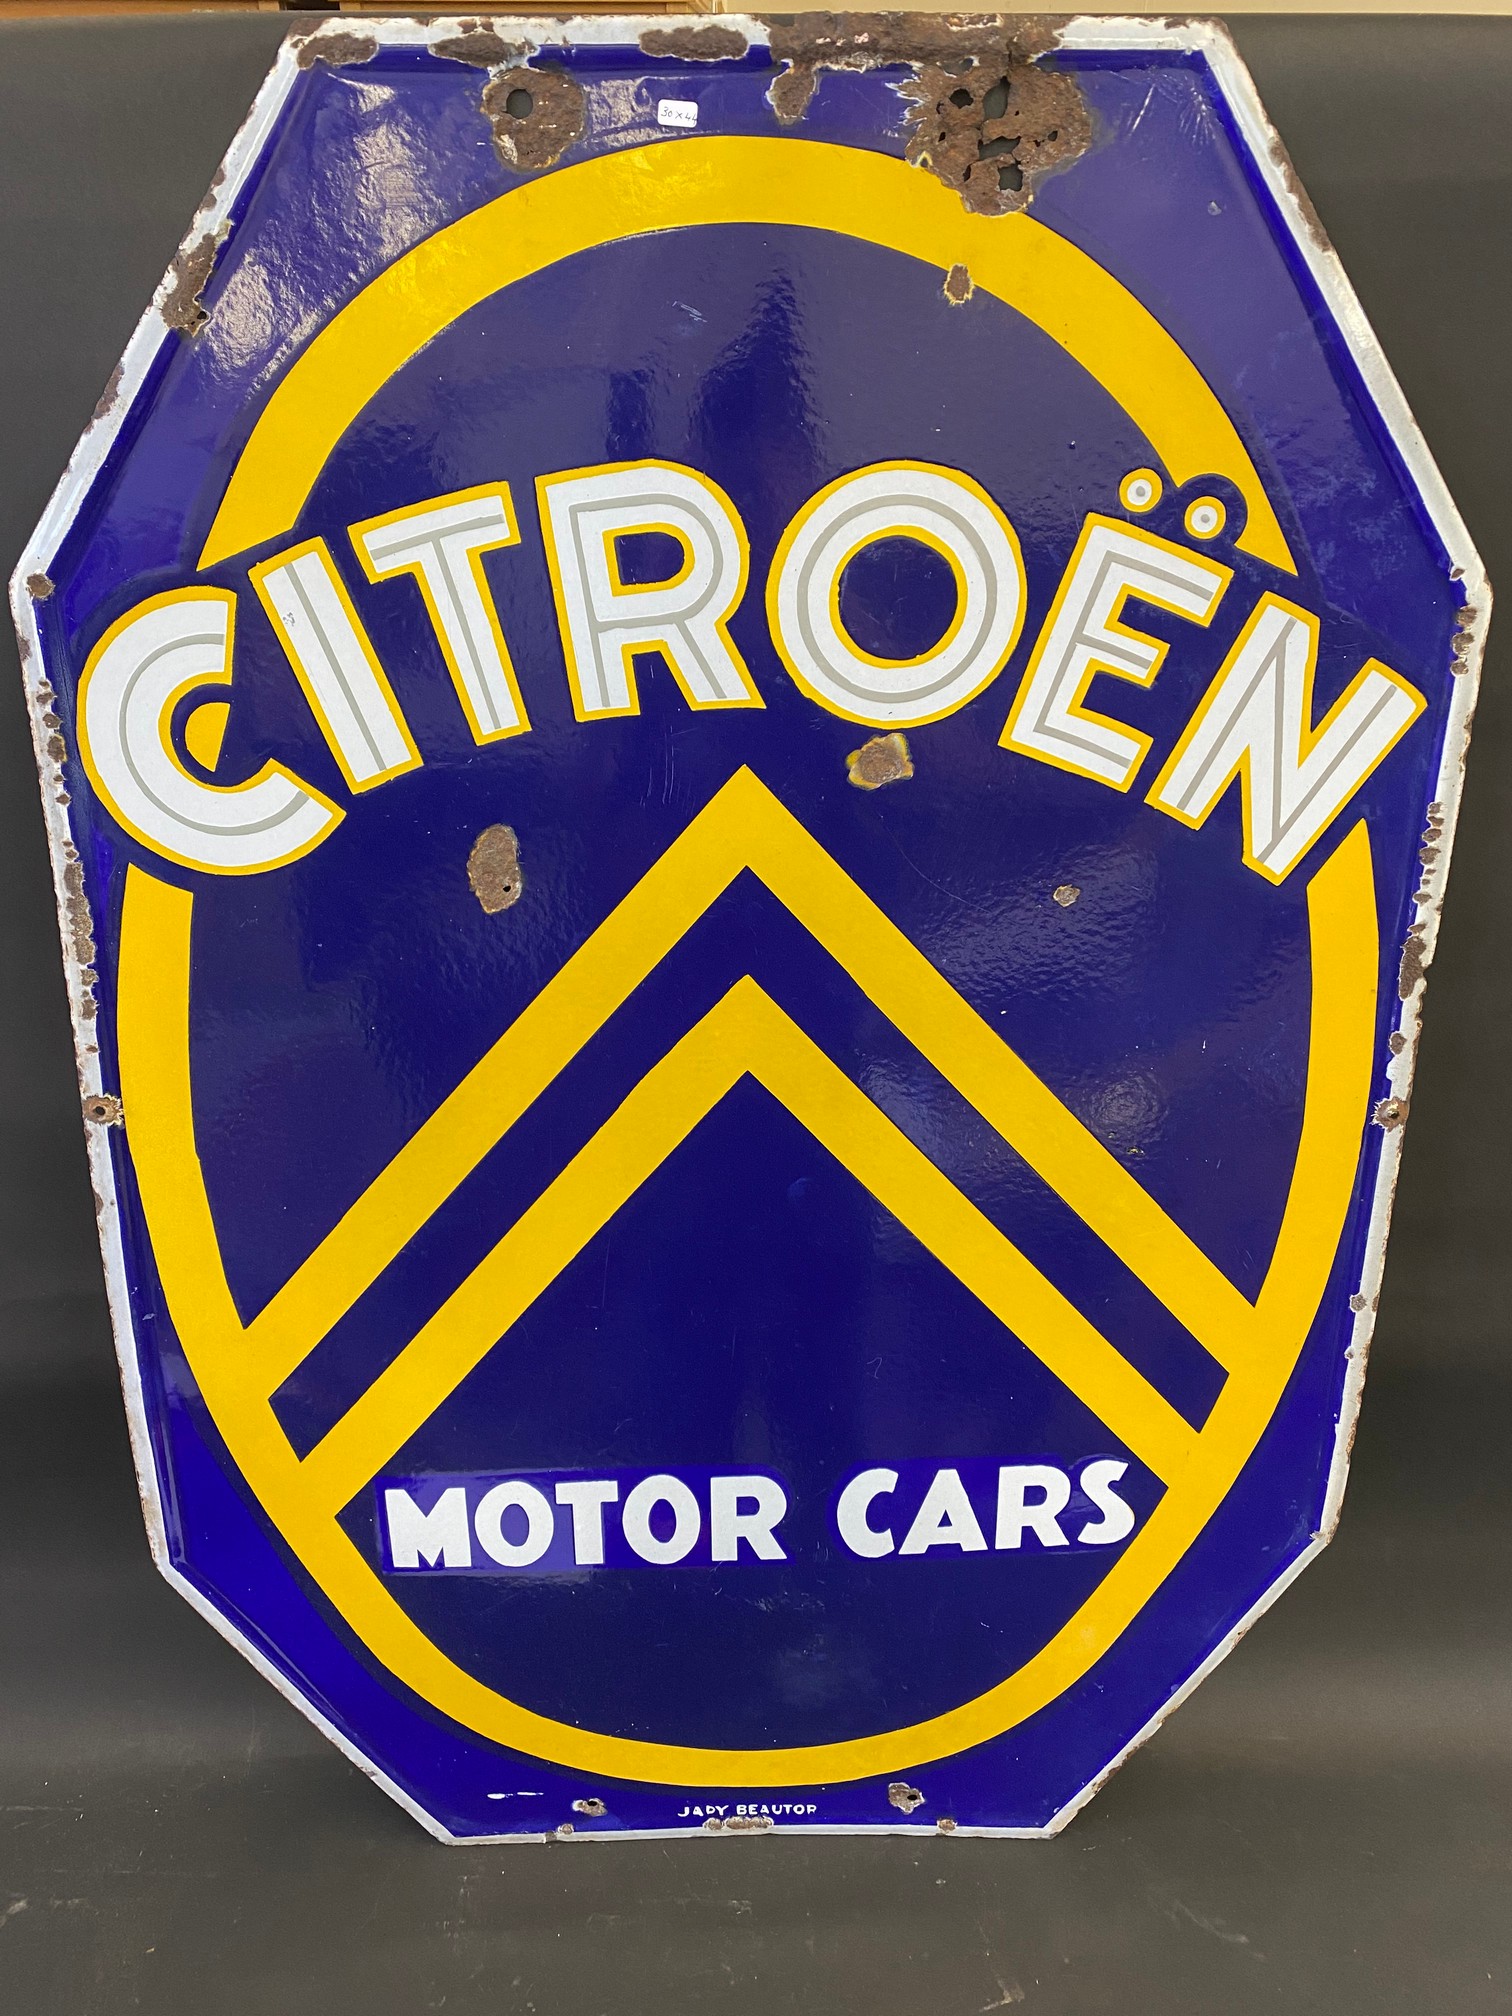 A large Citroen Motor Cars double sided enamel sign, 30 x 44".